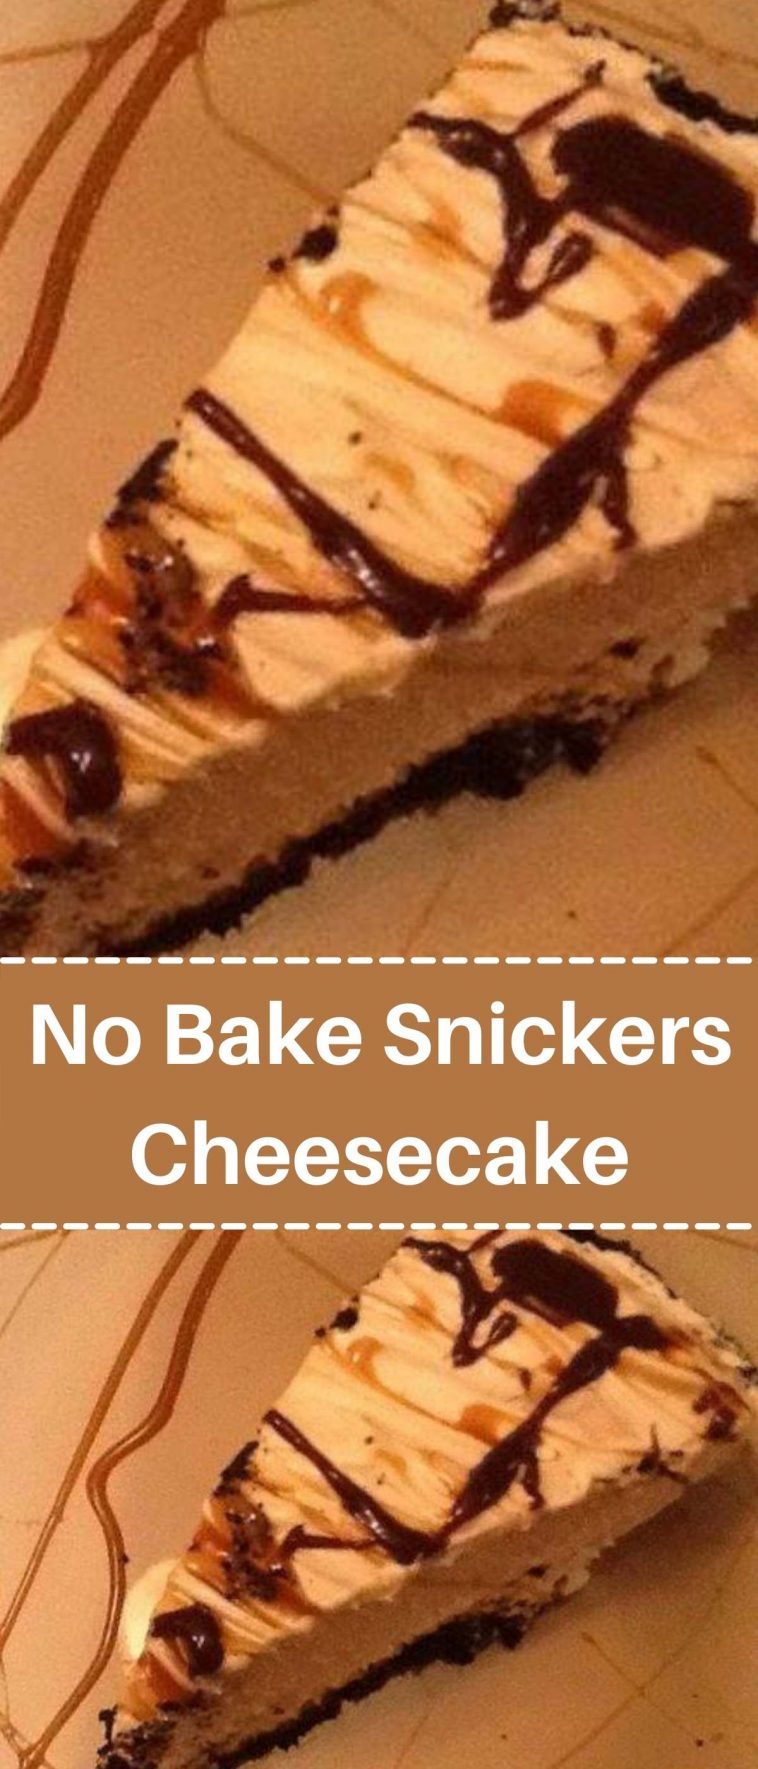 No Bake Snickers Cheesecake